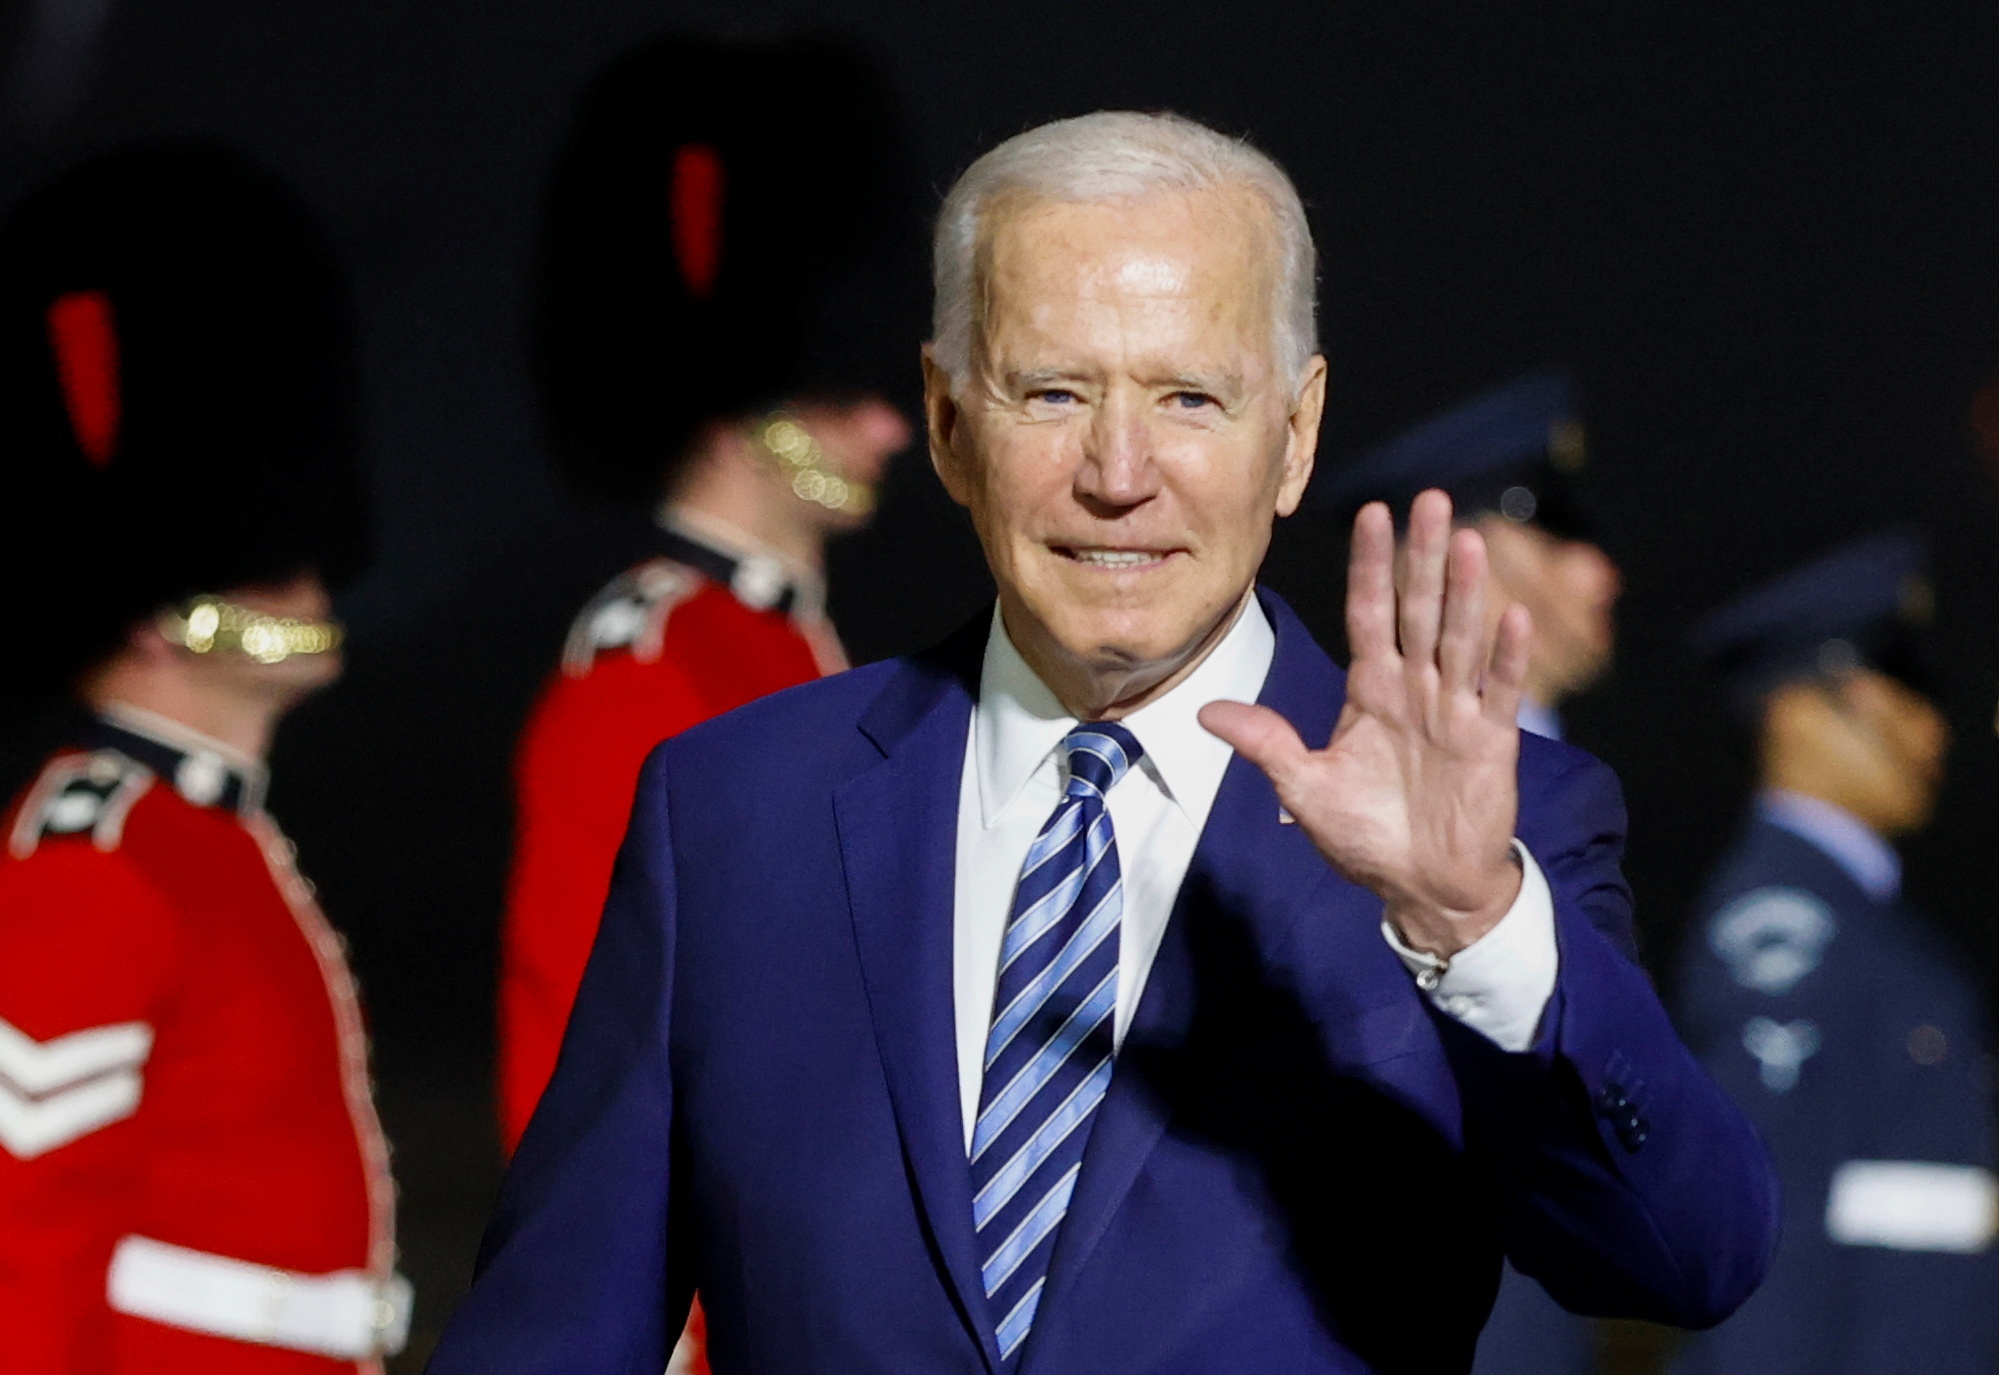 US President Joe Biden waves on arrival on Air Force One at Cornwall Airport Newquay on Wednesday night ahead of the G7 summit. Credit: PA